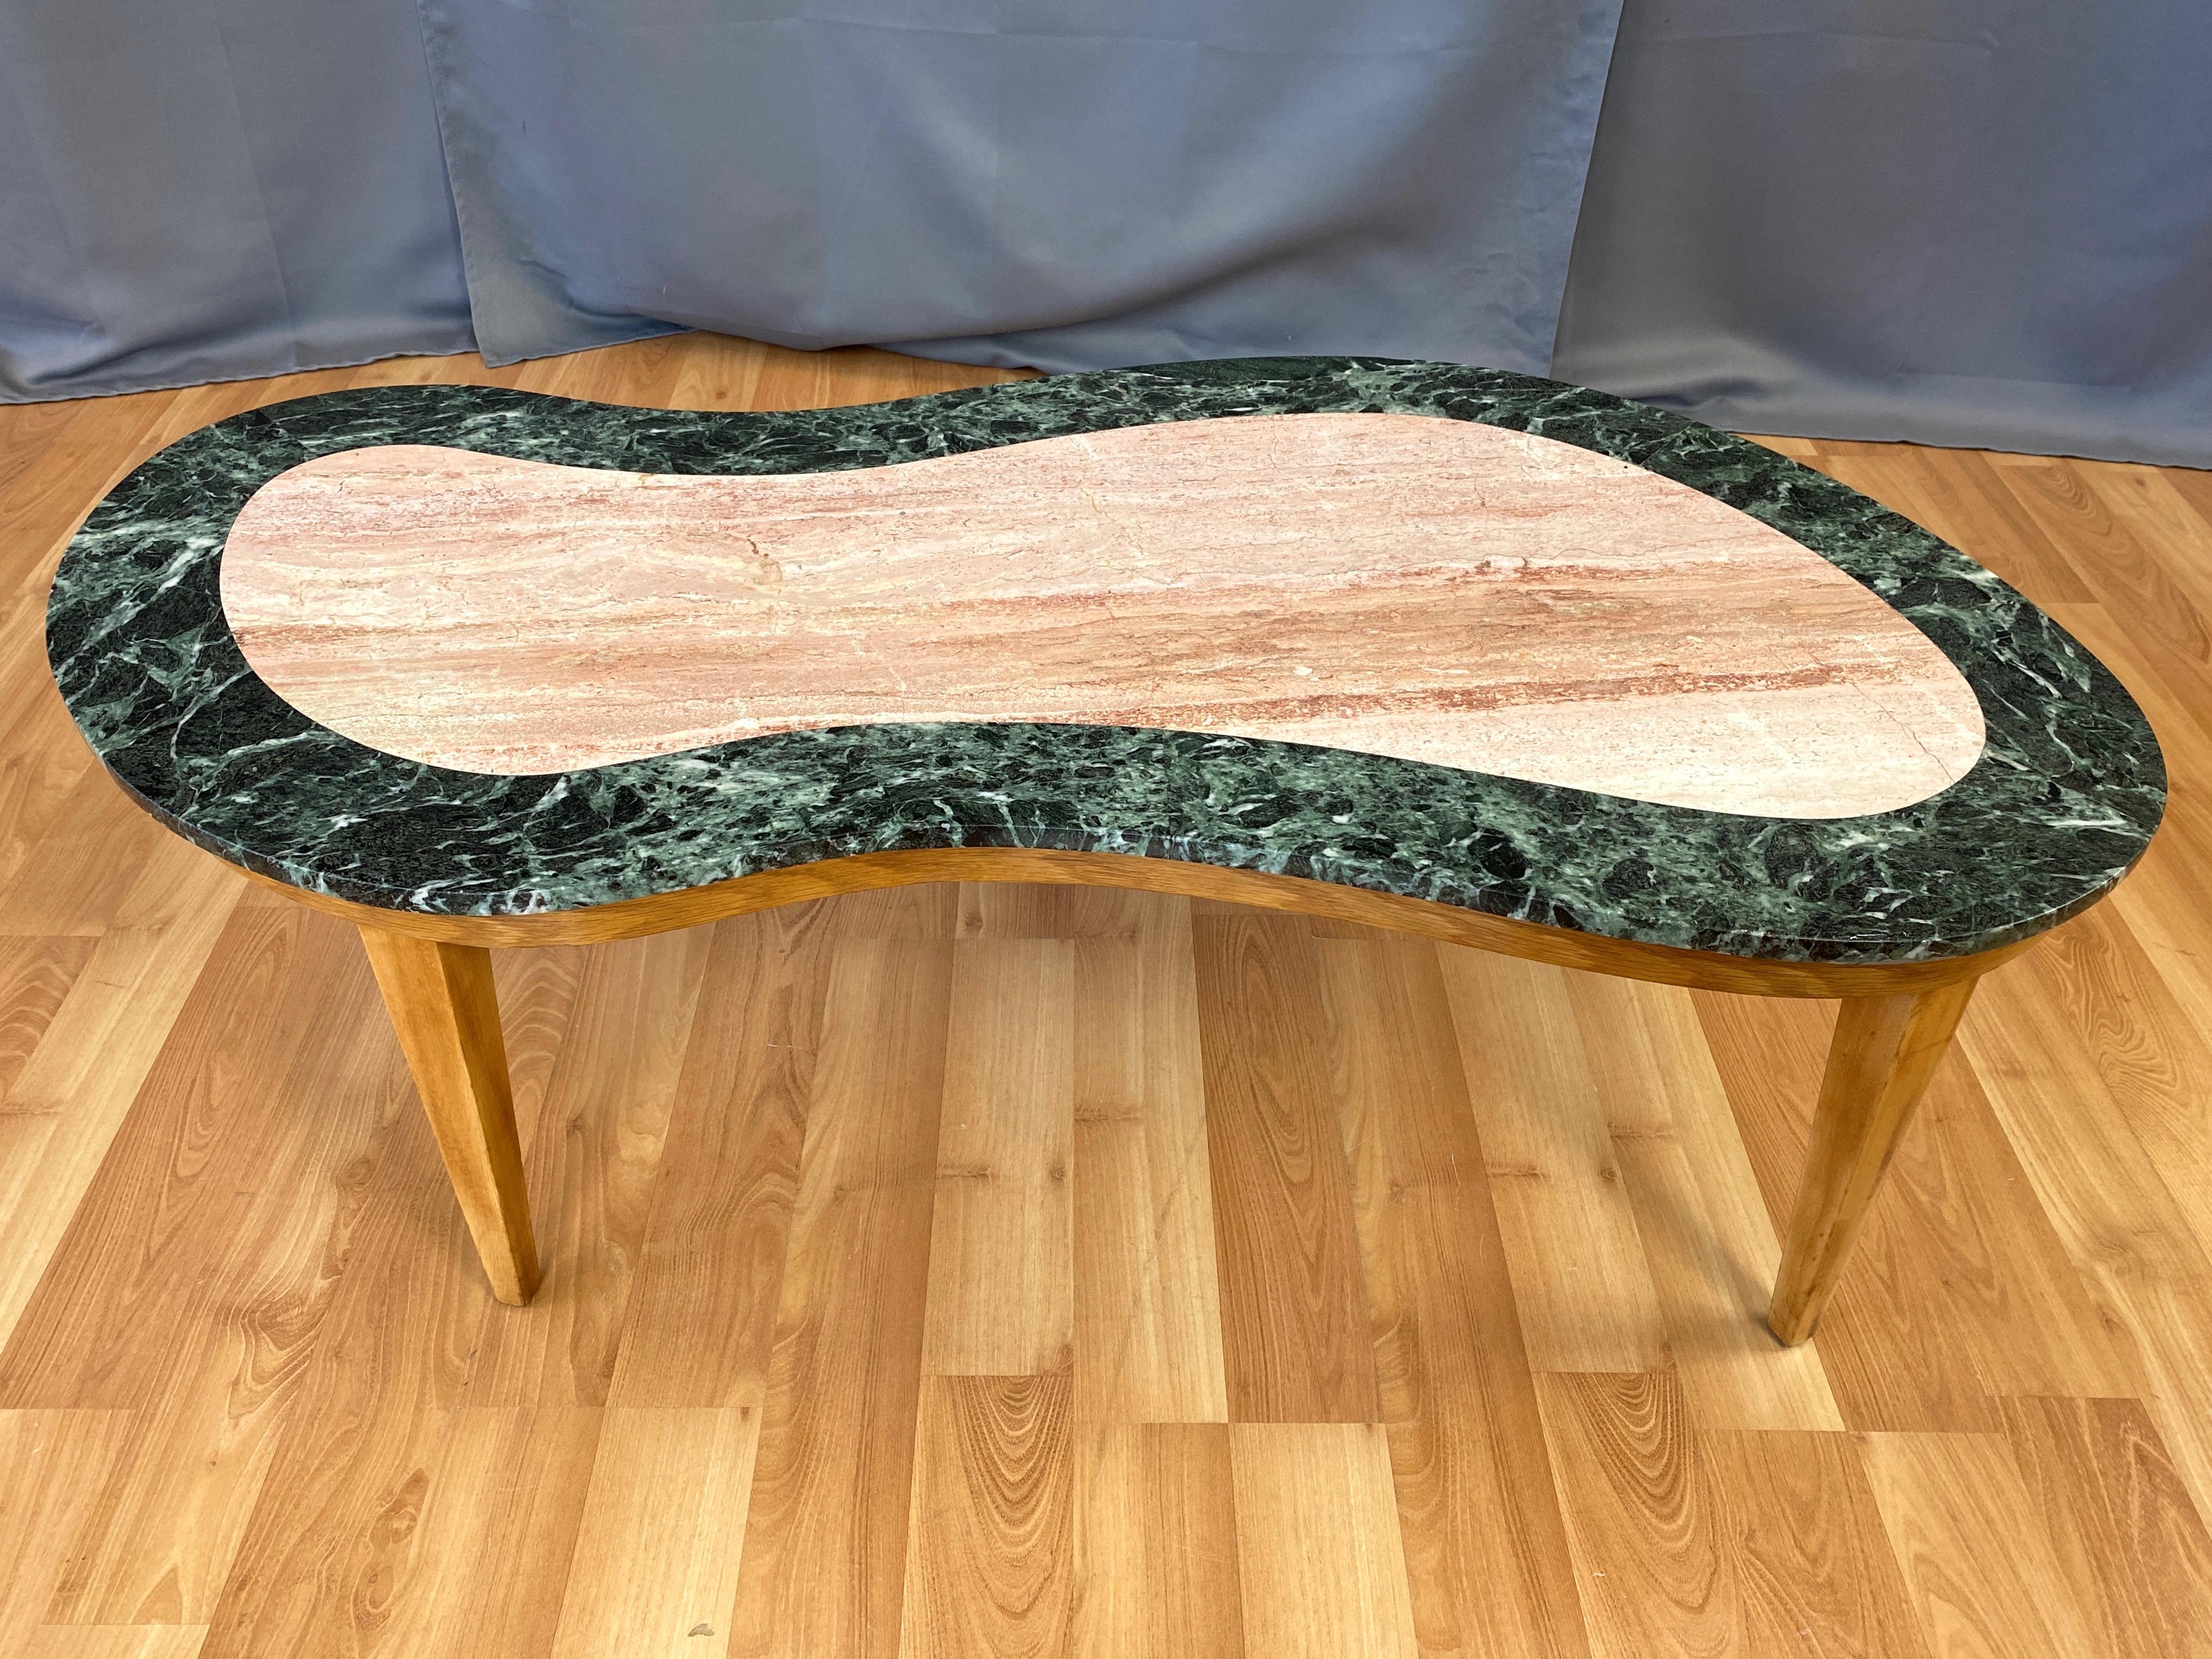 A fabulous 1950s freeform marble and elm wood coffee table made in Italy by Continental.

Expansive top of beautifully striated muted pink marble with a broad and dynamically-patterned dark green marble border. Calls to mind a wind-swept desert